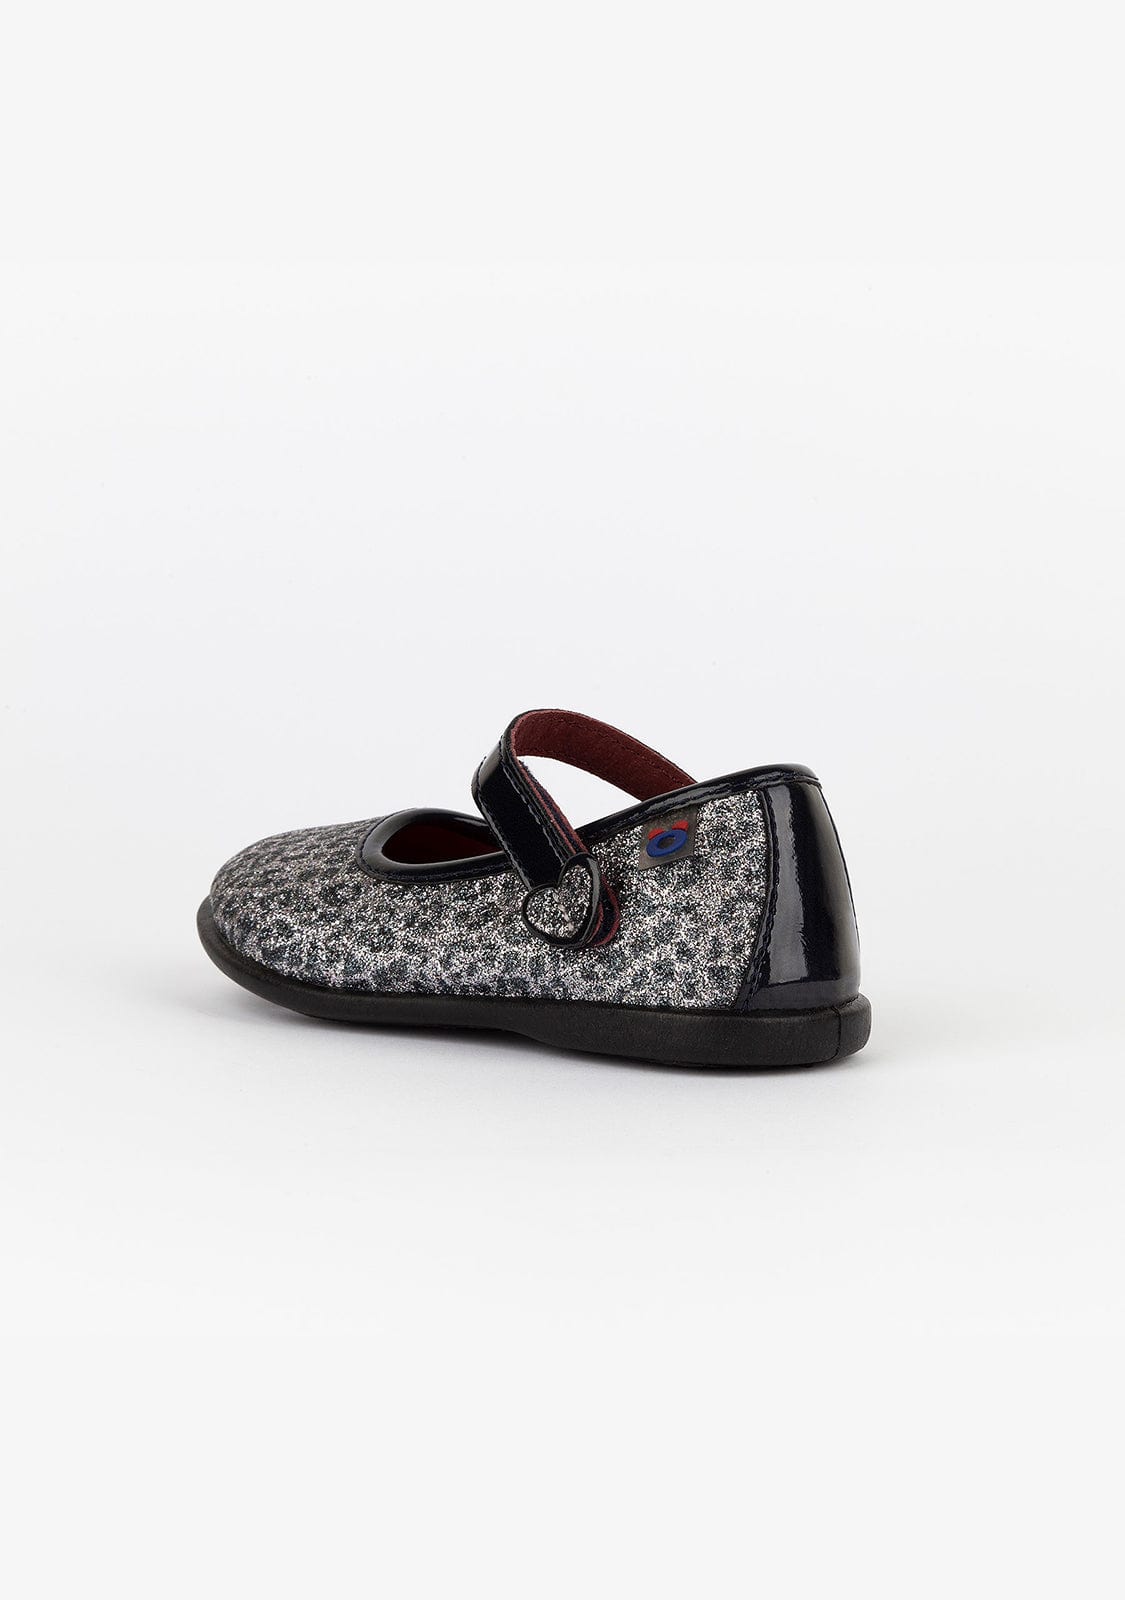 OSITO Shoes Baby's Leopard Print Glitter Mary Janes